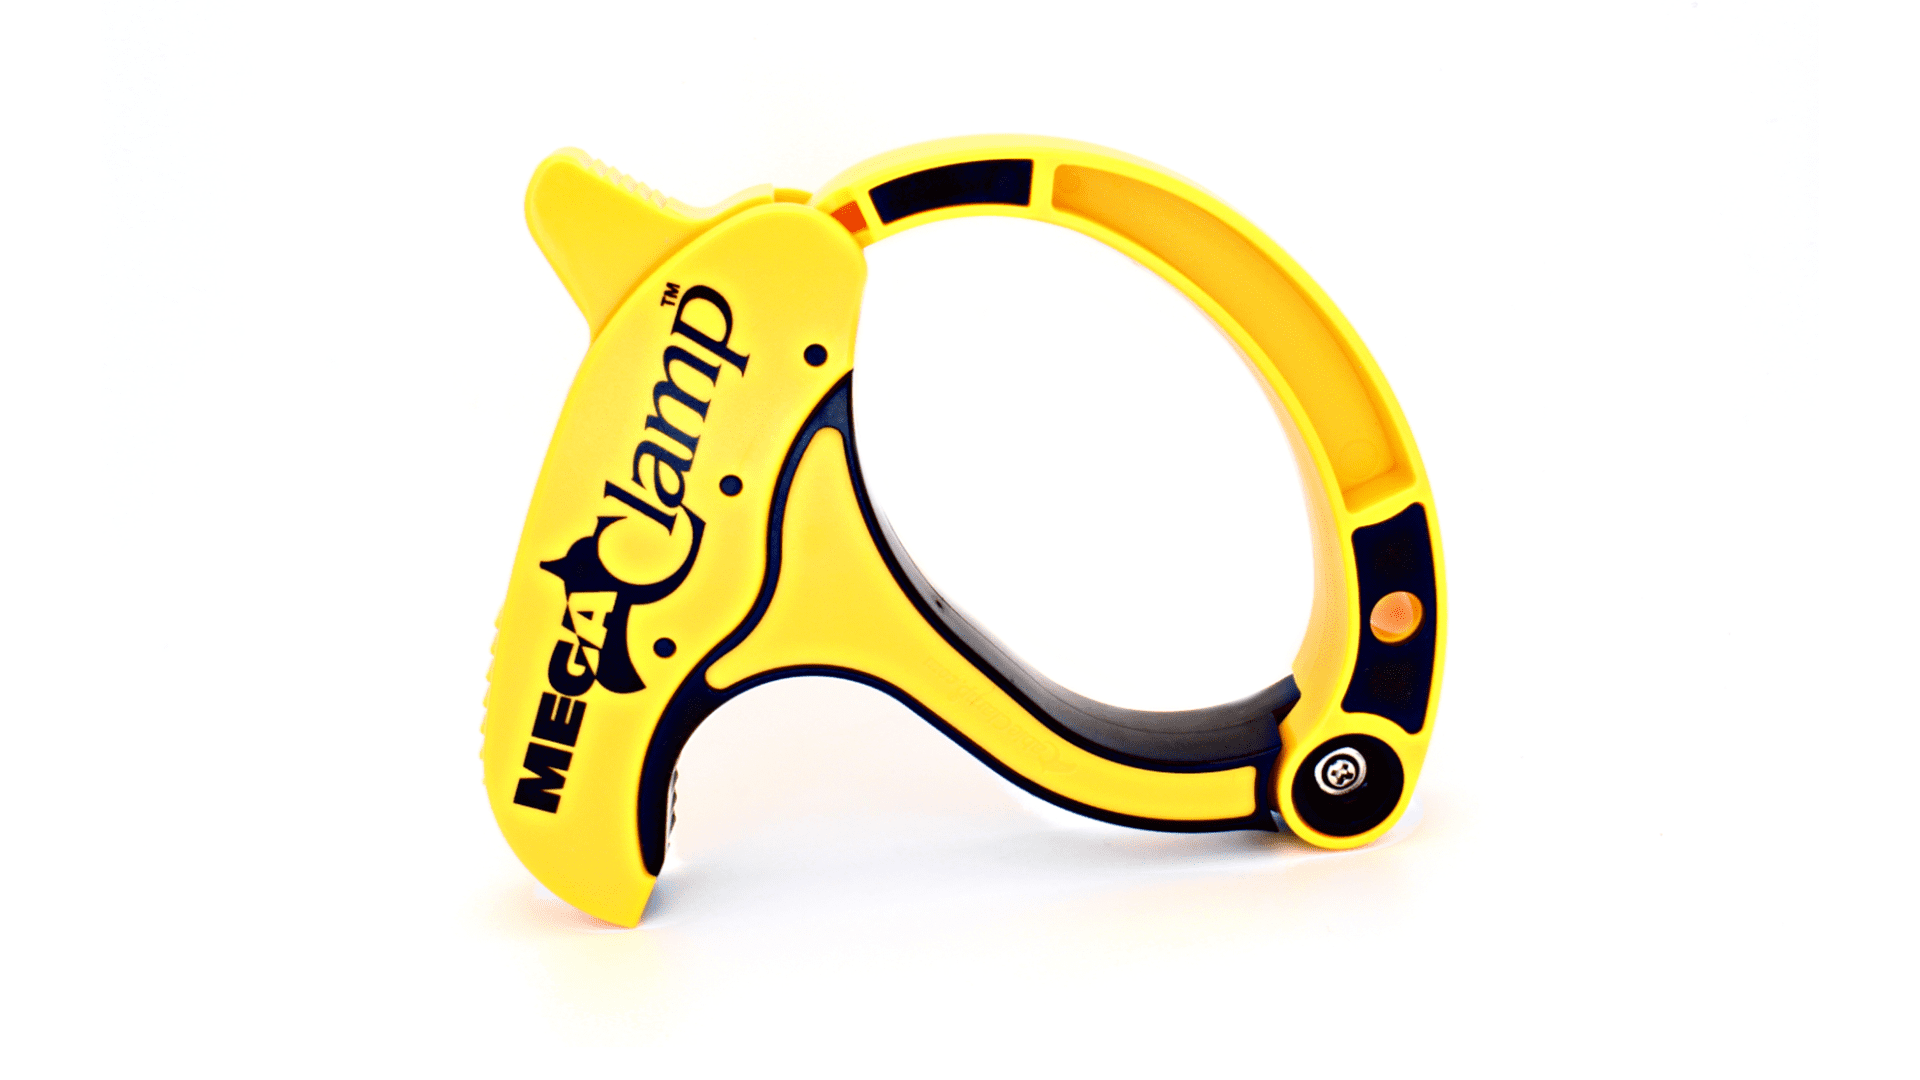 Mega Clamp for Cable & Hose Management (Yellow/Black) $1.50 at Walmart w/ Free Store PIckup